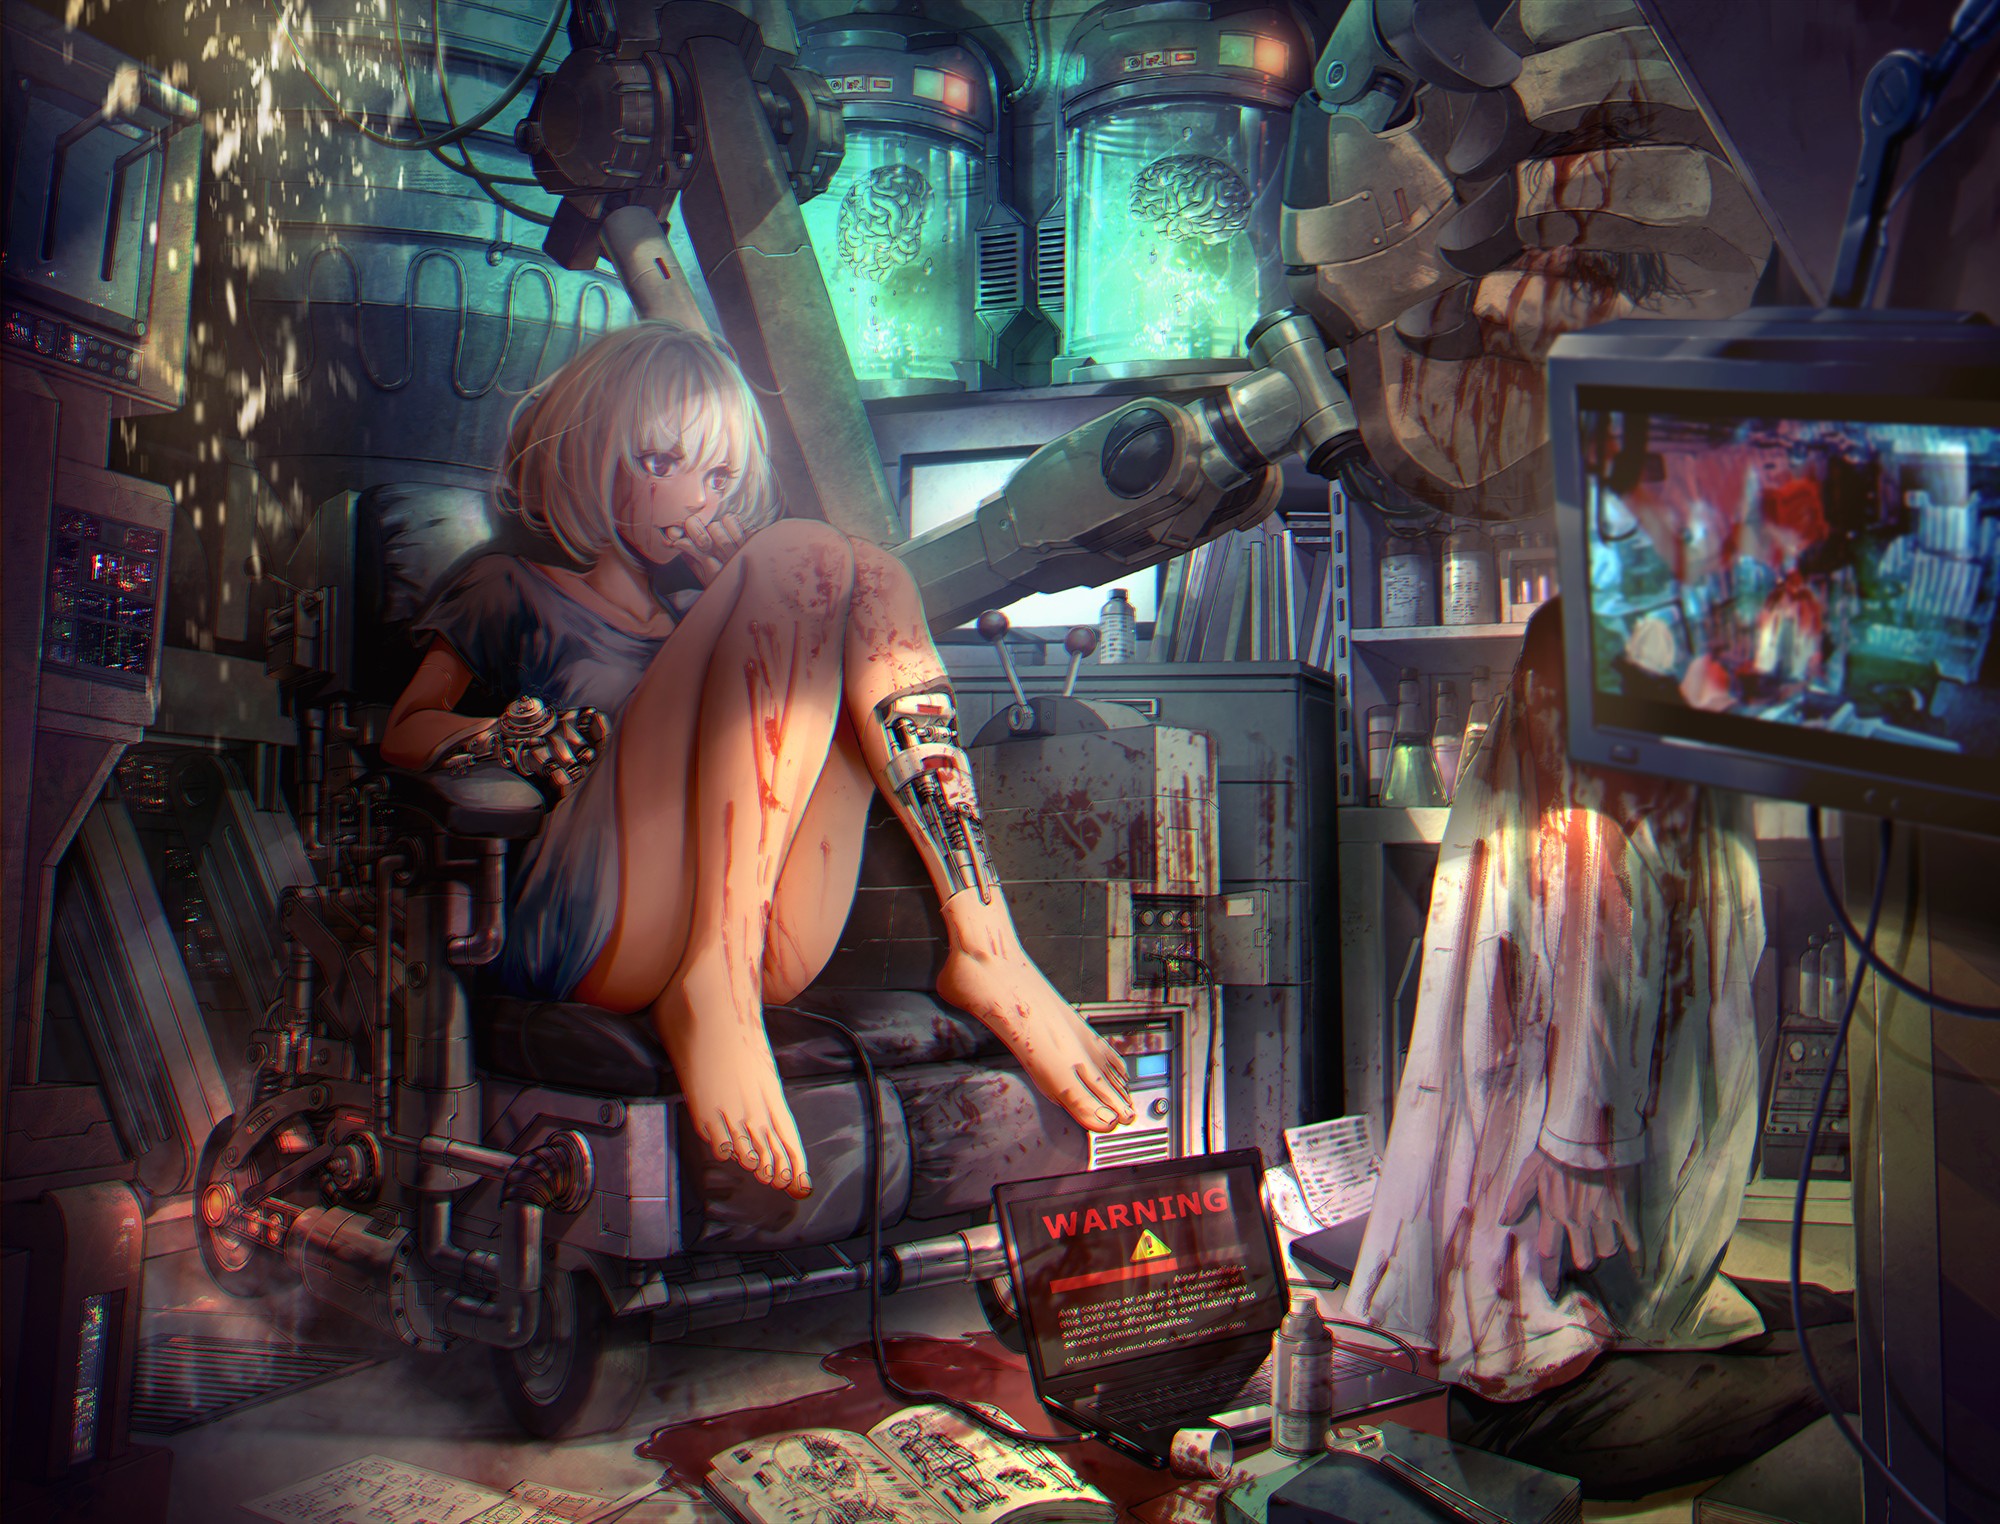 Anime 2000x1524 anime anime girls barefoot original characters mecha girls laboratories cyborg science fiction blood Pixiv thighs together women indoors indoors thighs legs blonde monitor technology futuristic women